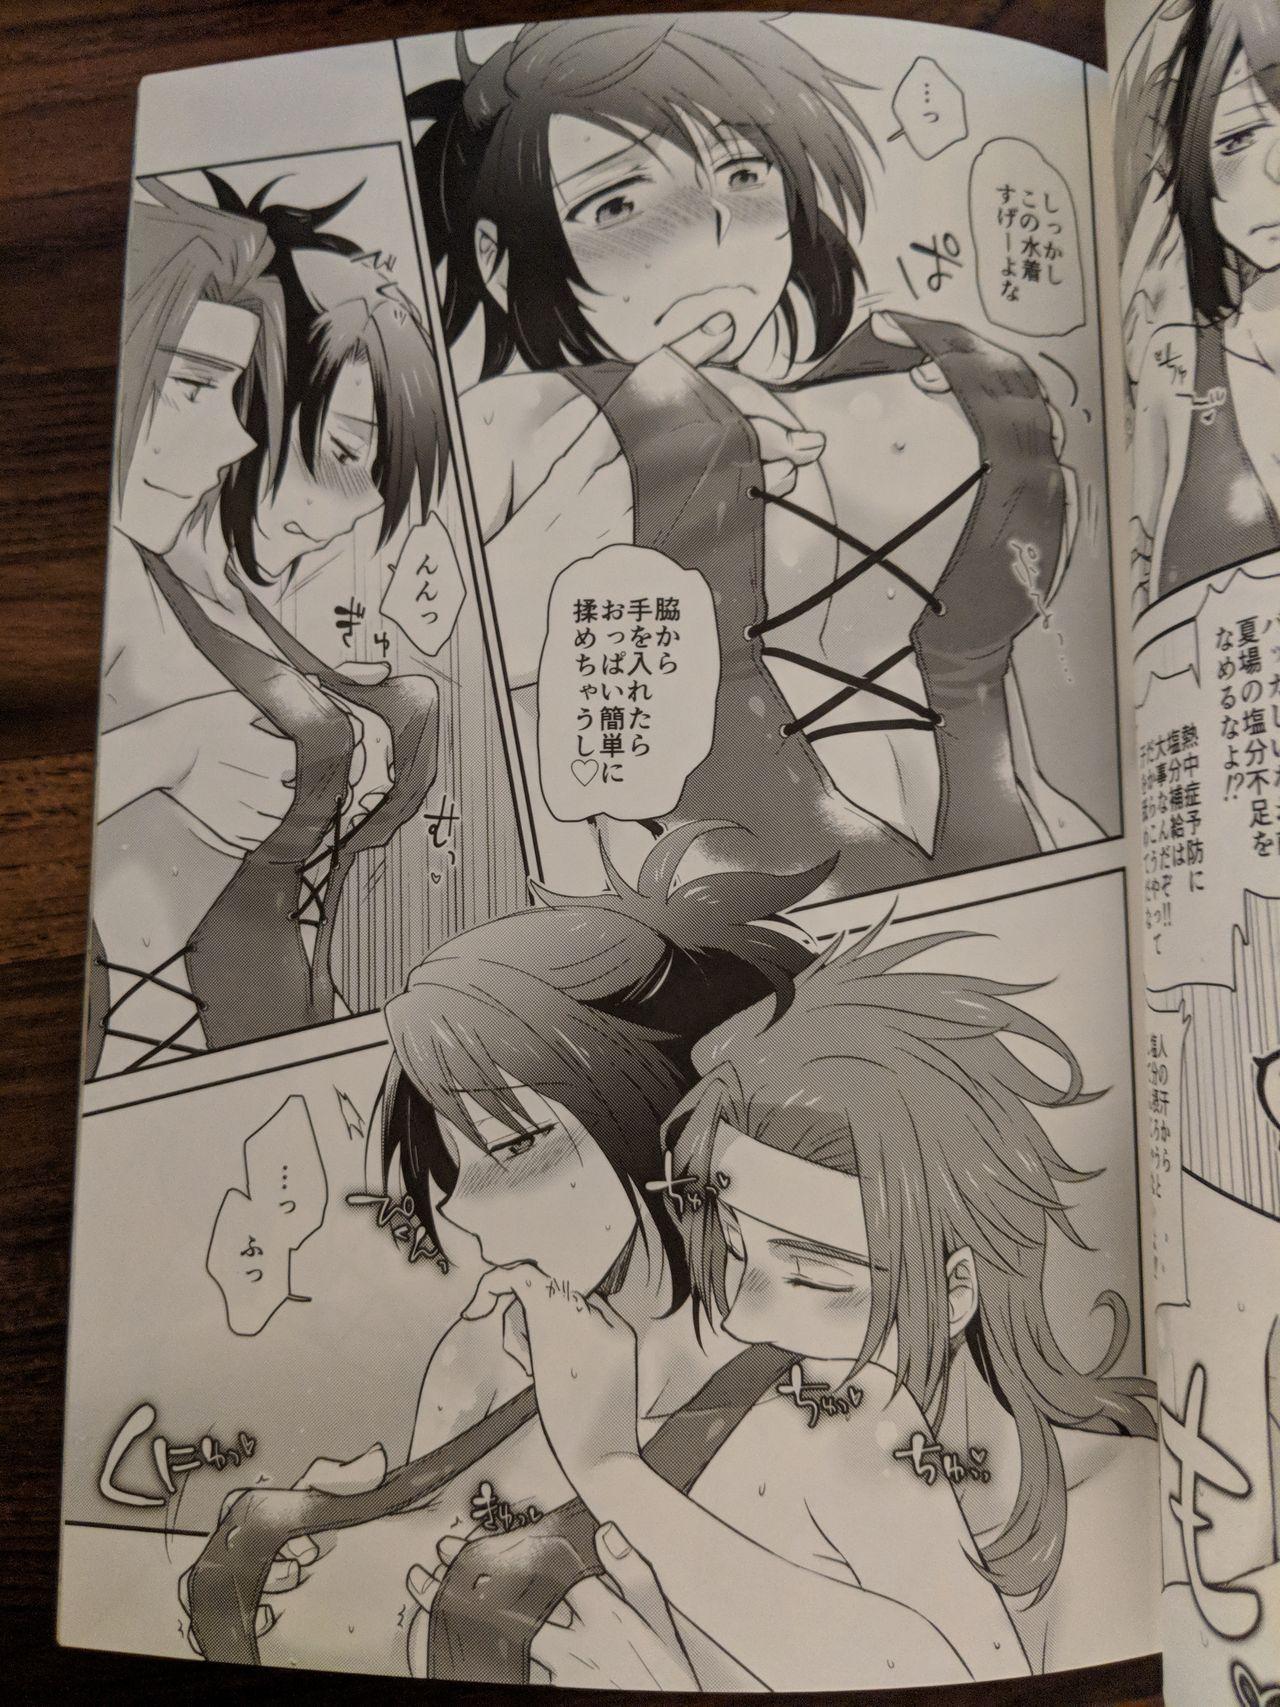 Amazing 彼女が水着にきがえたら - Tales of symphonia Nasty Porn - Page 10